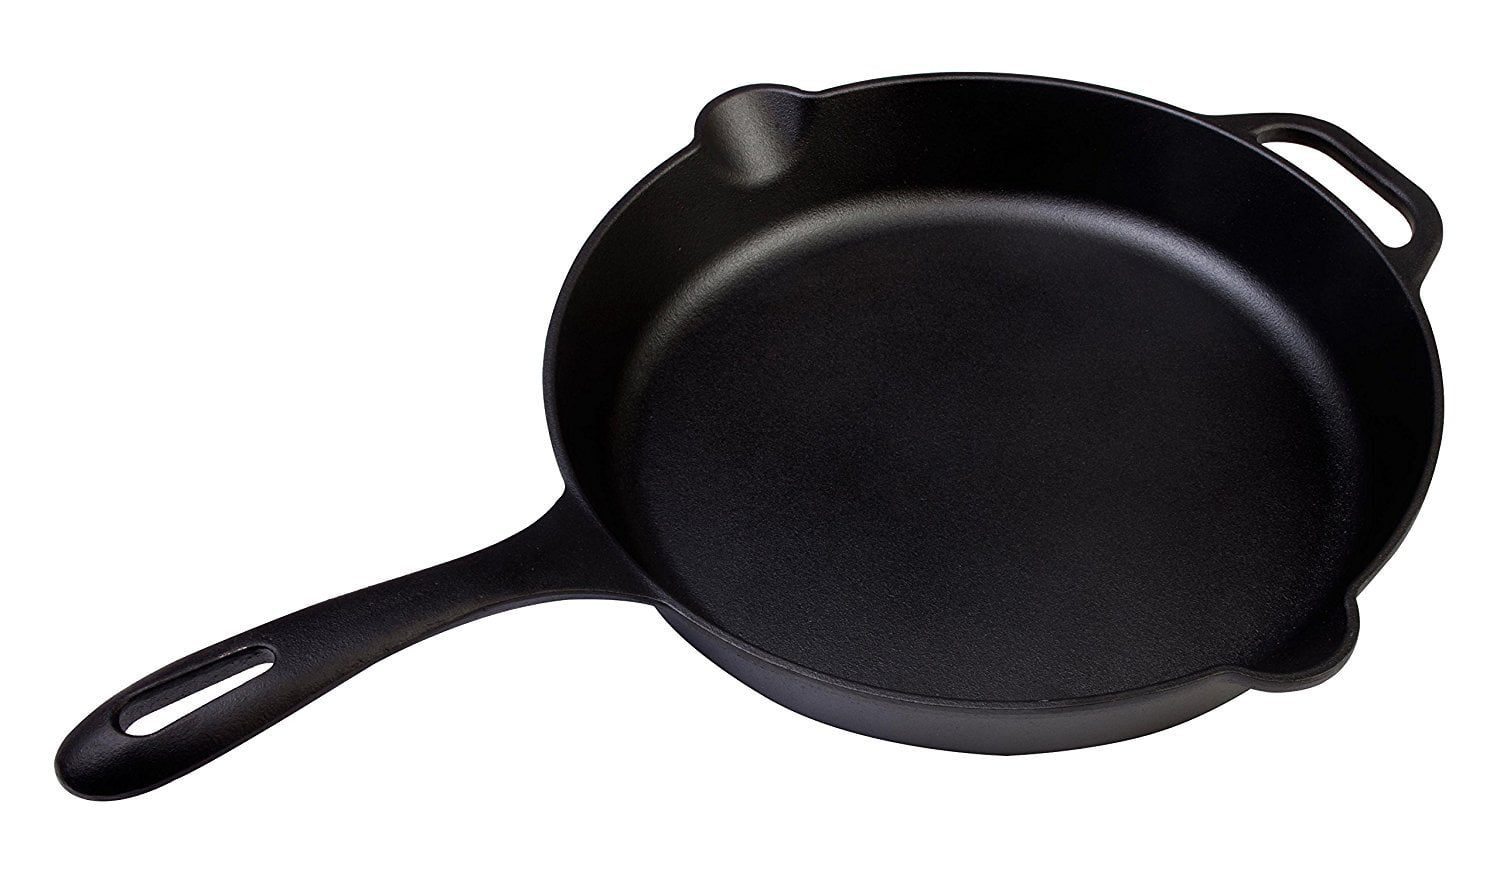 Victoria 12-Inch Cast-Iron Comal Pizza Pan with a Long Handle and a Loop  Handle, Preseasoned with Flaxseed Oil & Cast Iron Skillet, Pre-Seasoned